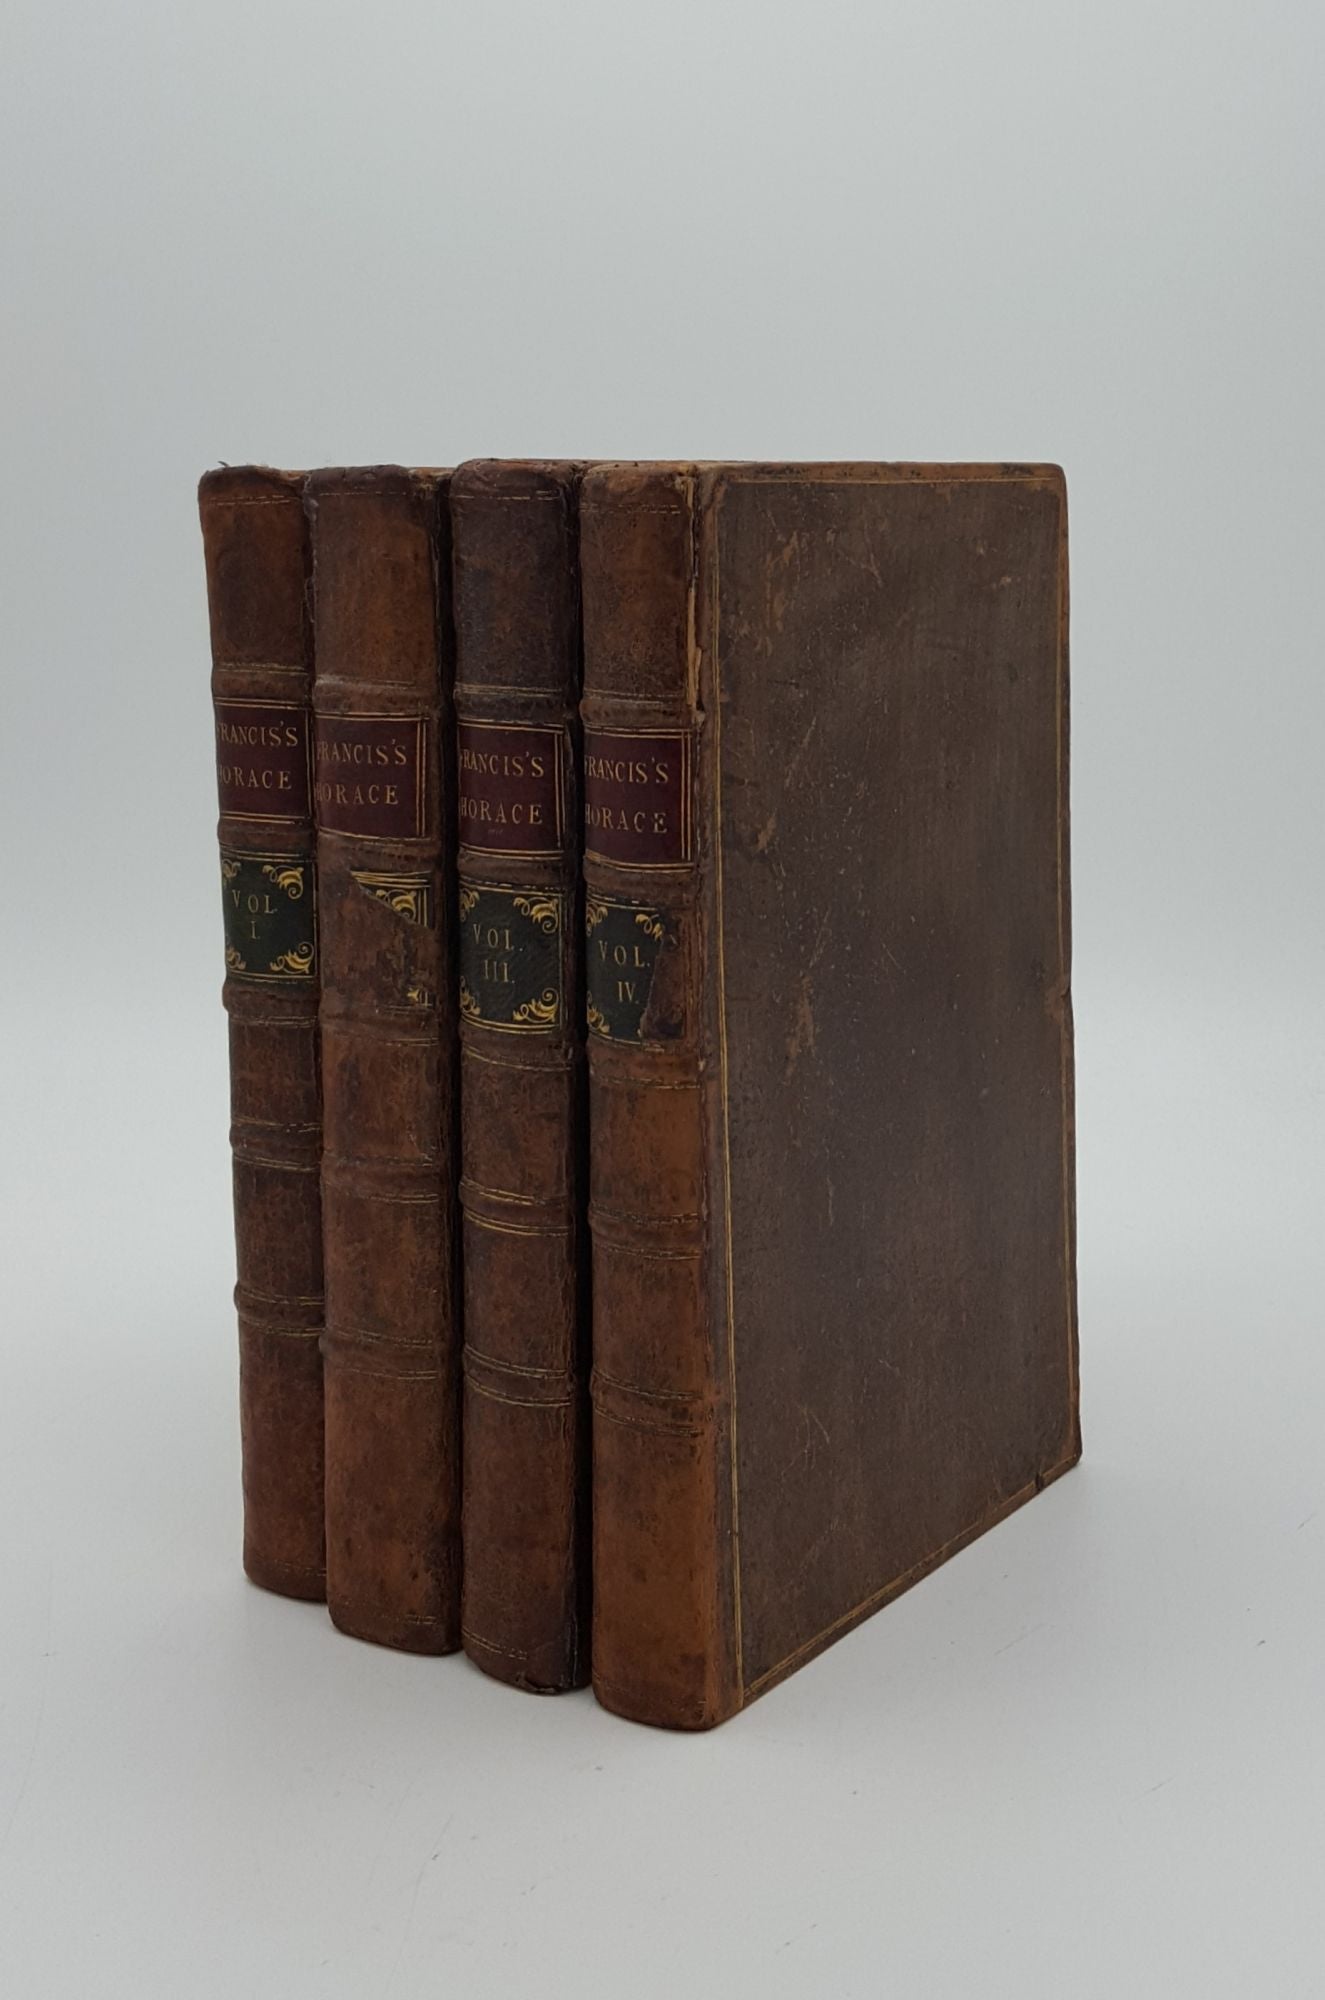 HORACE, FRANCIS Philip - Poetical Translation of the Works of Horace with Original Text and Critical Notes Collected from His Best Latin and French Commentators in Four Volumes